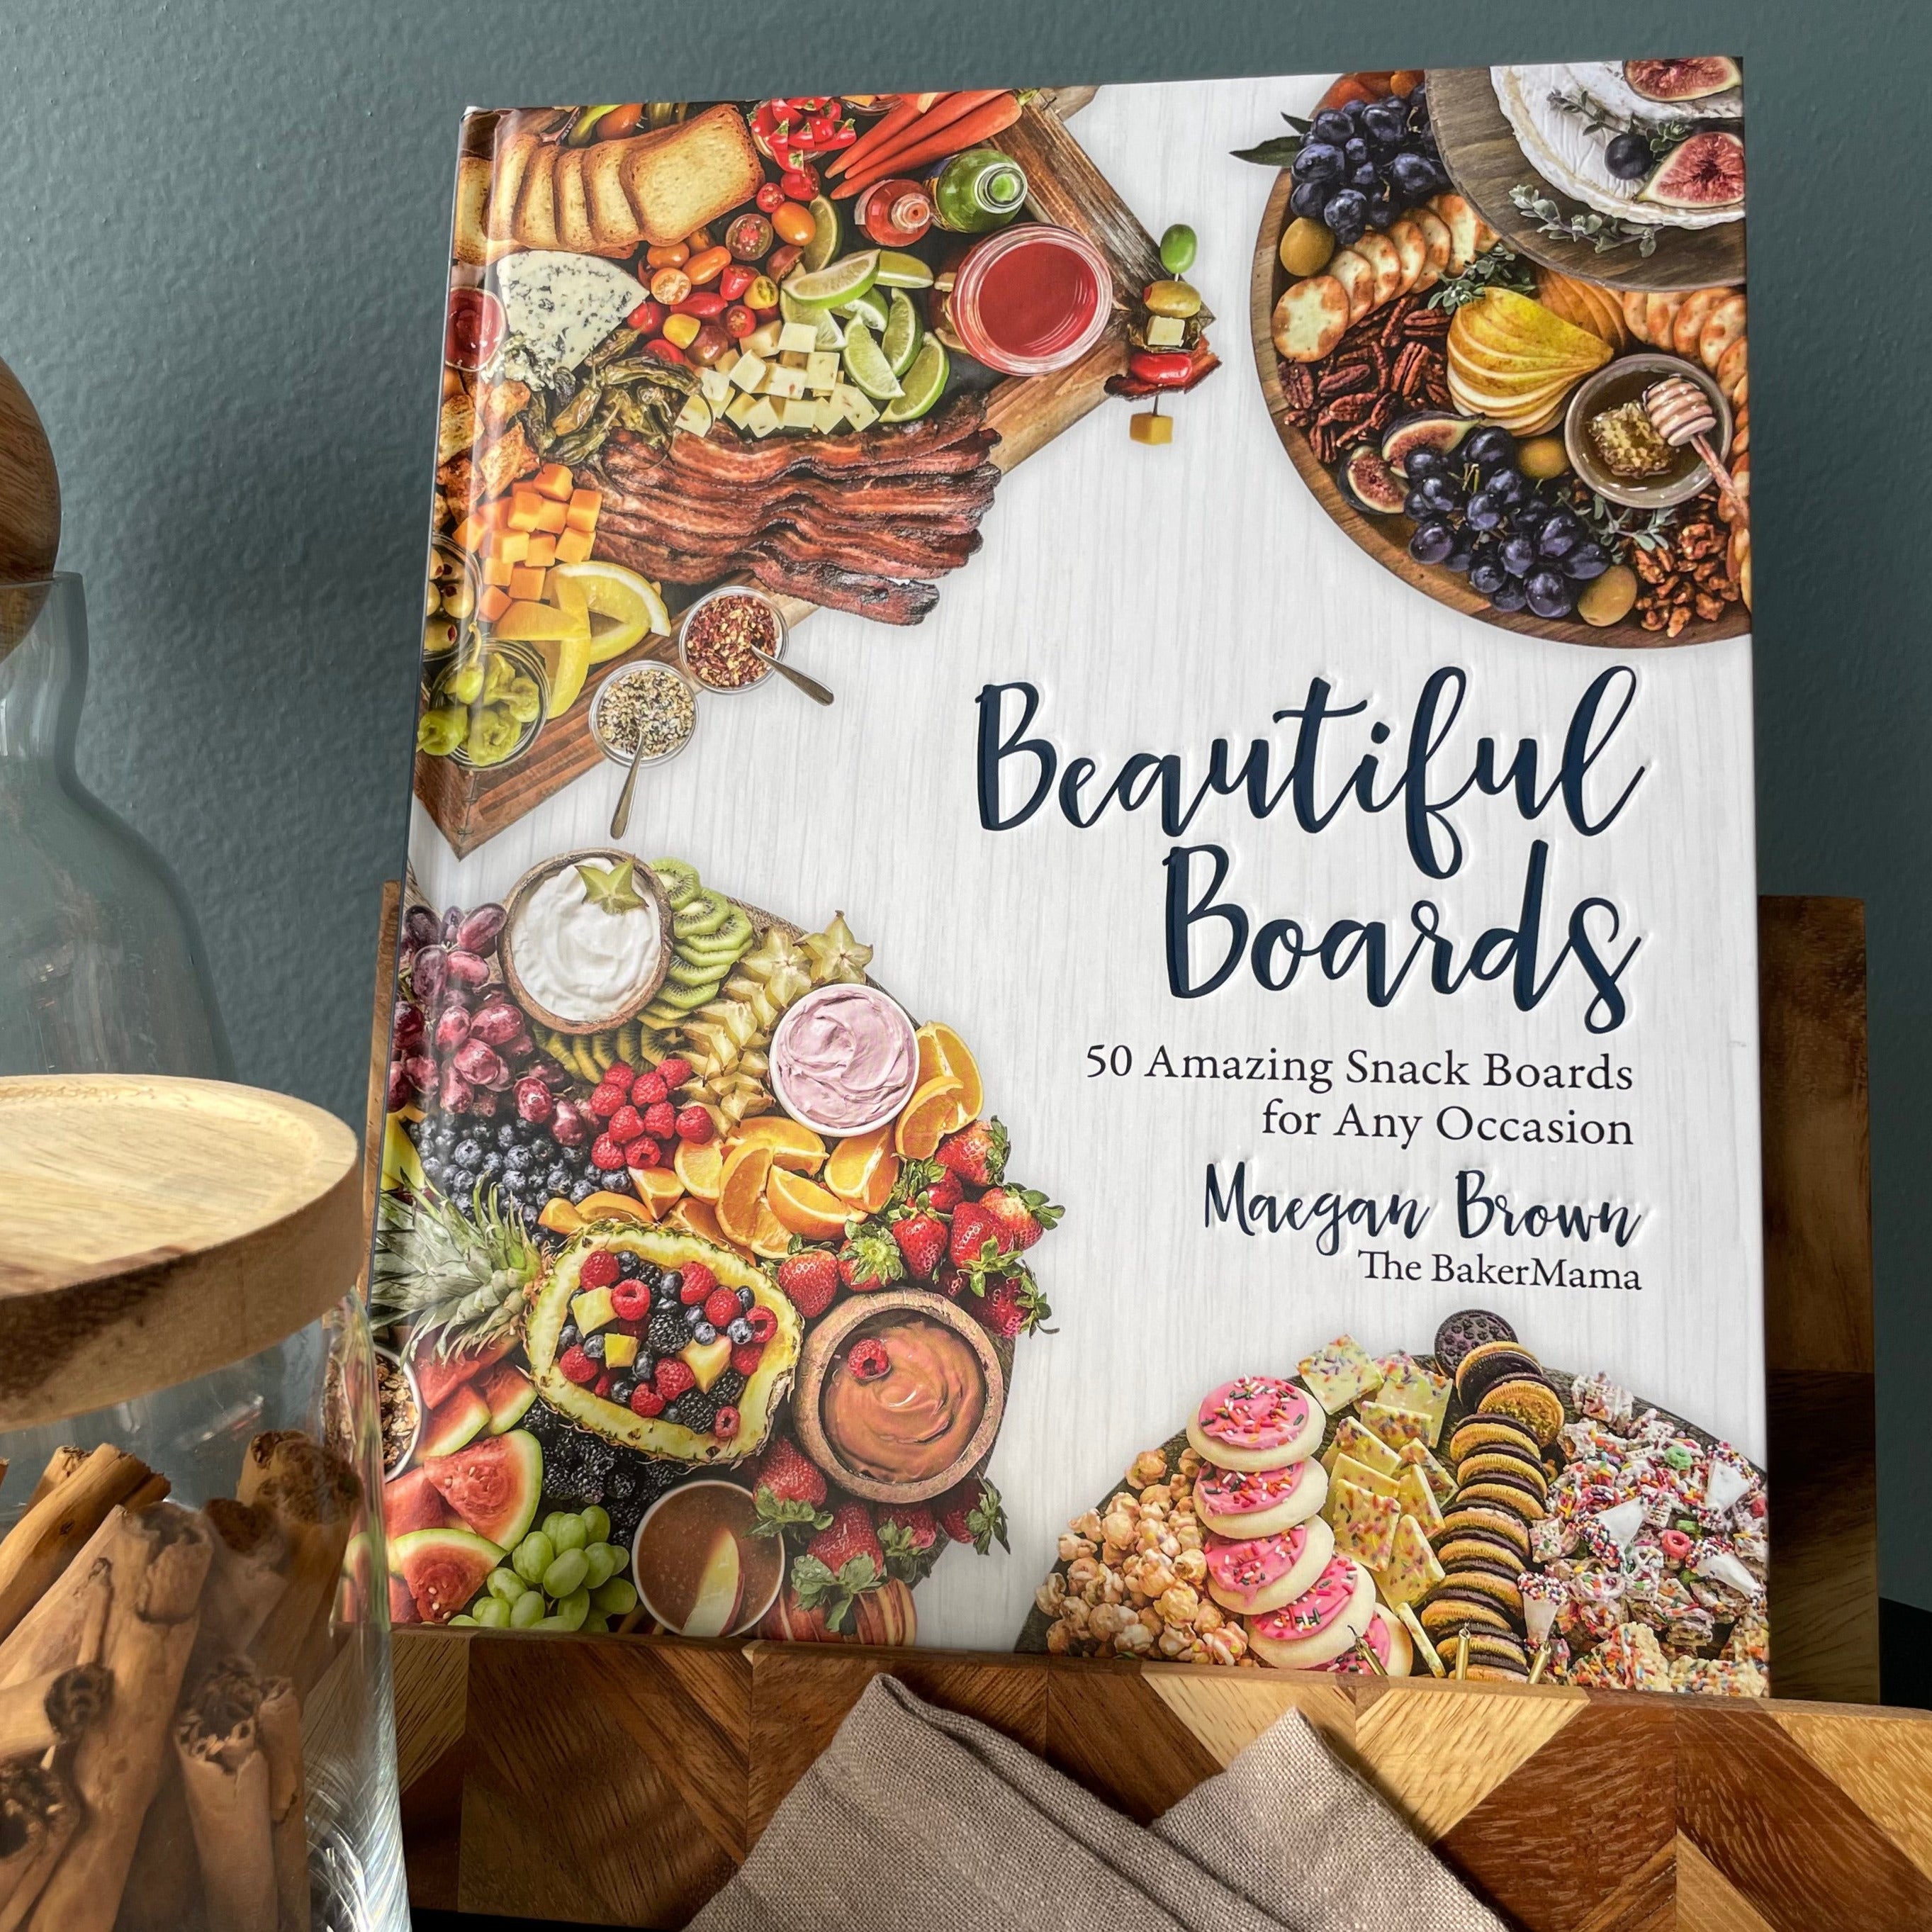 Image of Beautiful Boards by Maegan Brown, The Baker Mama